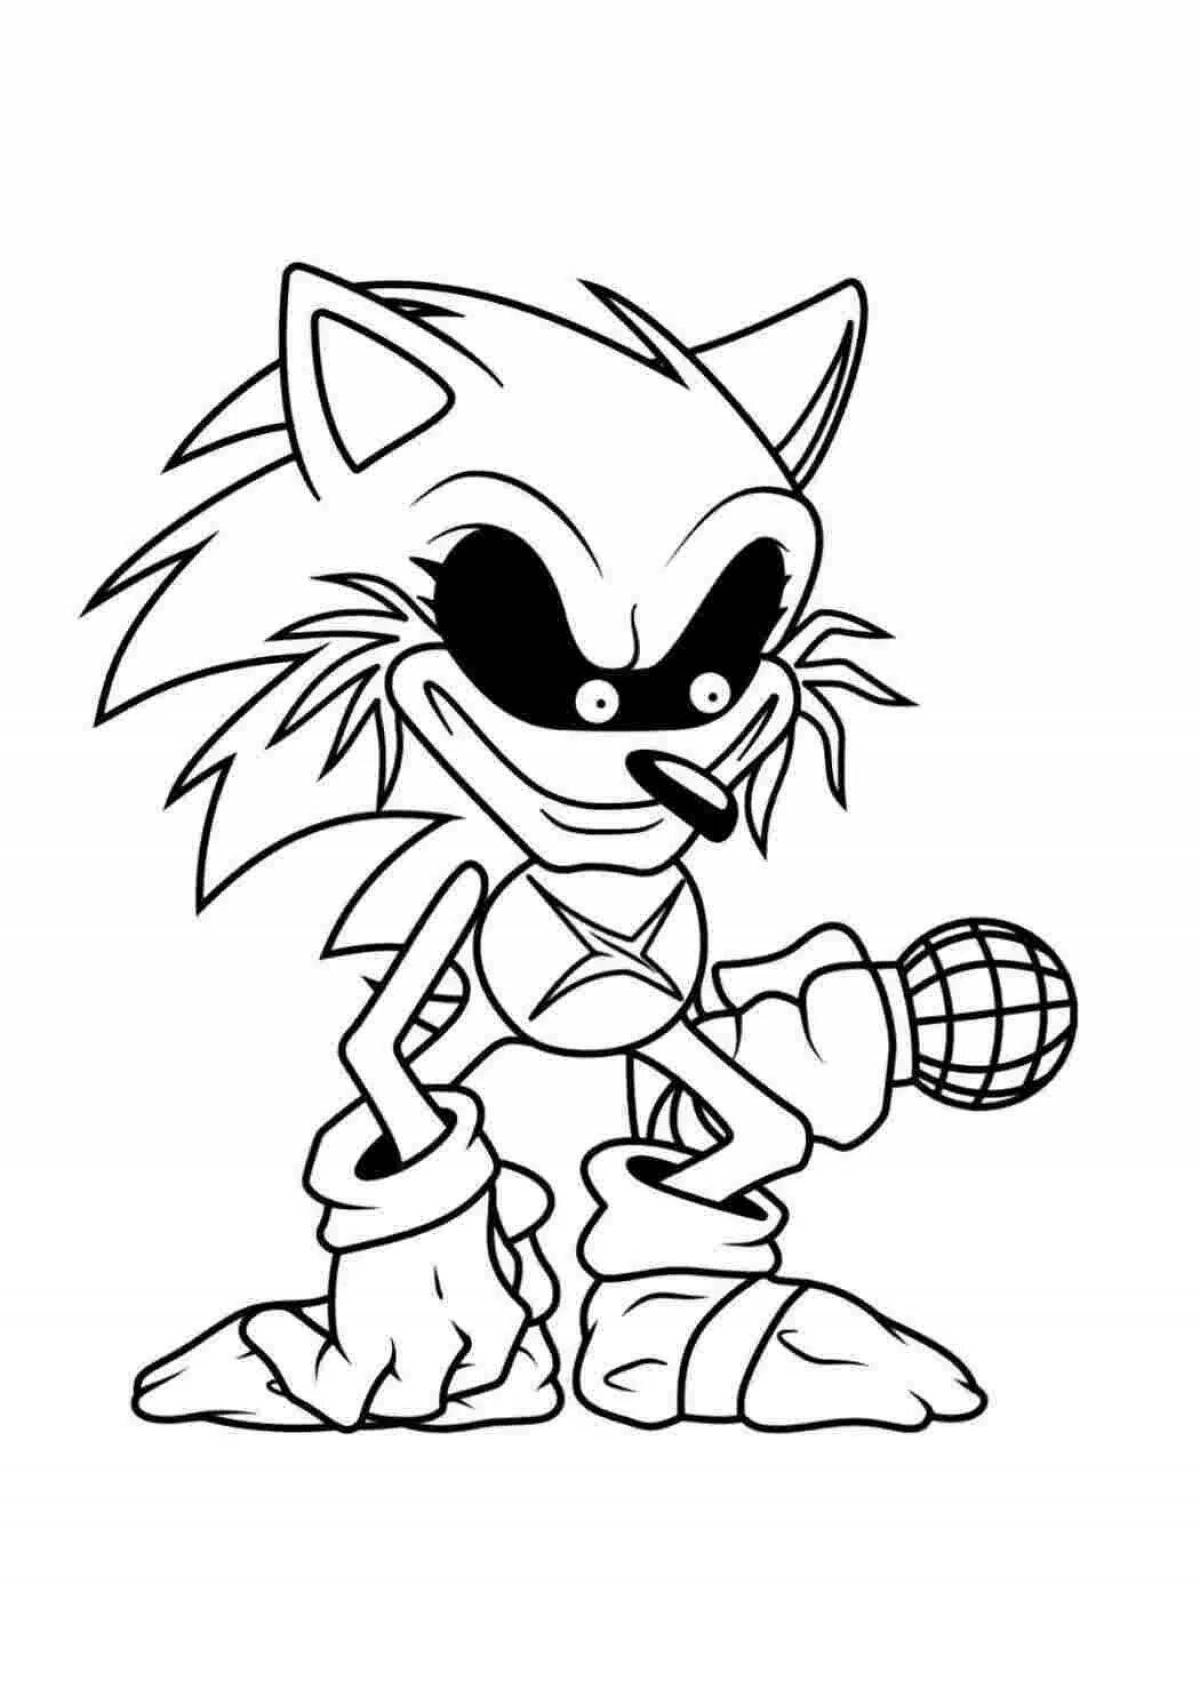 Sonicexe amazing coloring page